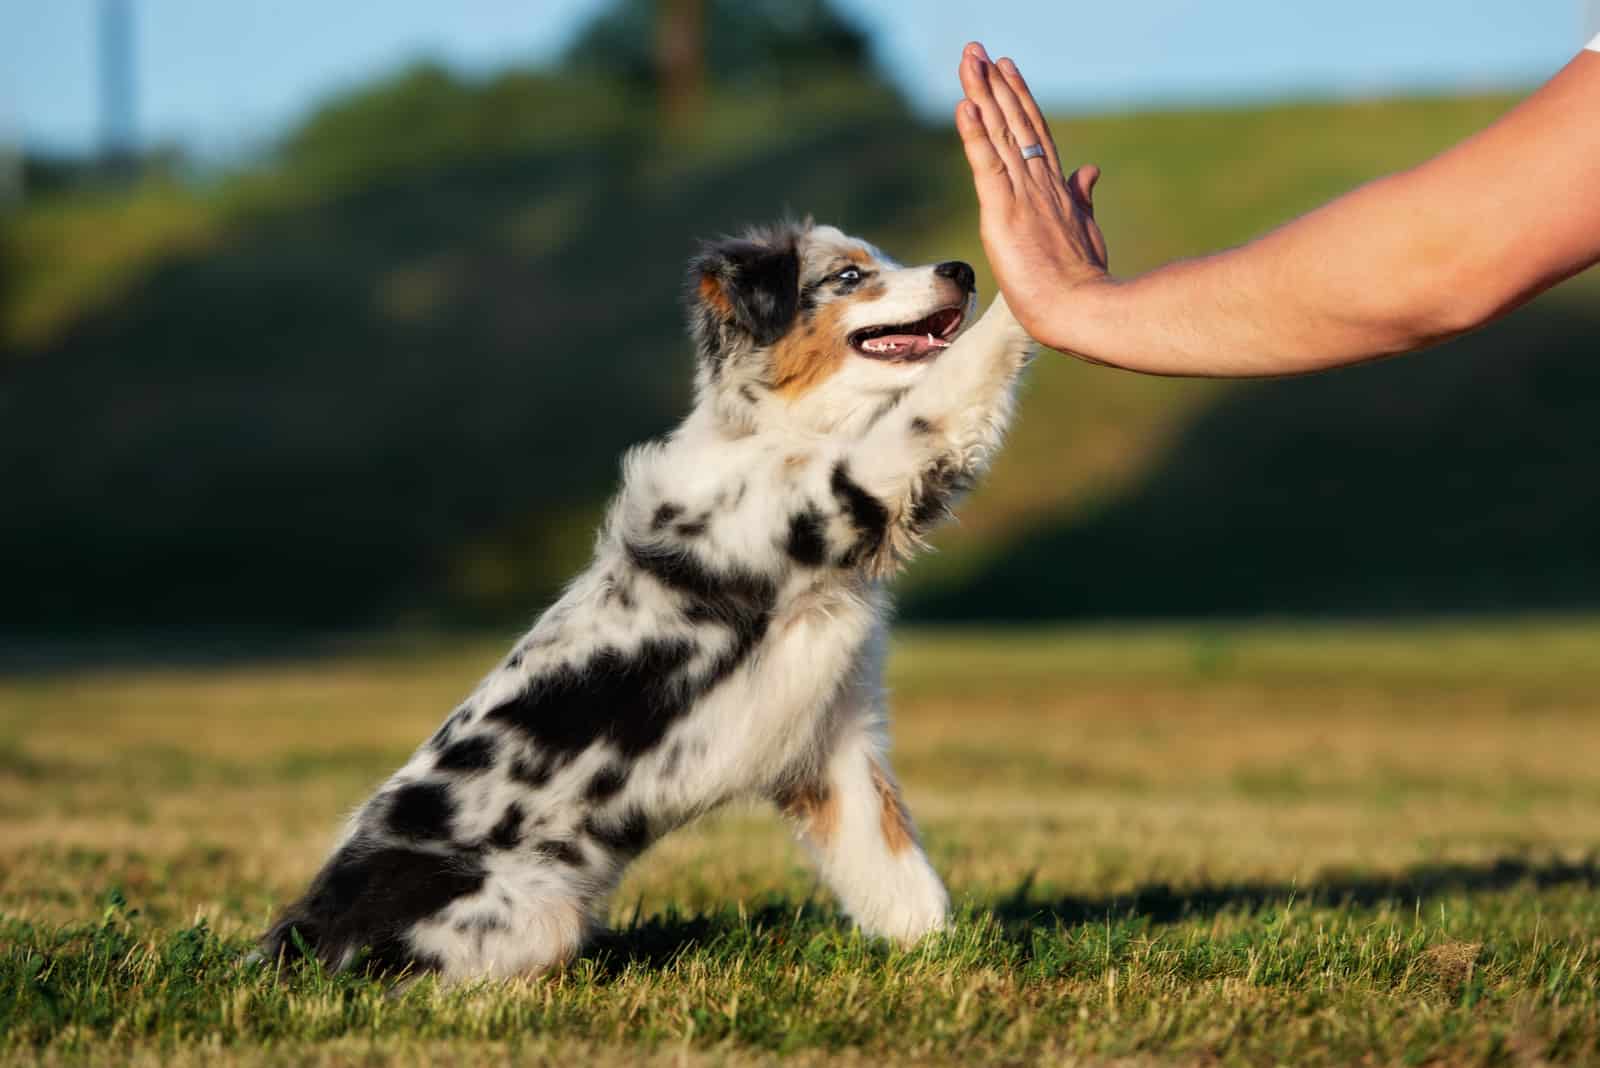 Beautiful Australian Shepherd puppy gives paw to owner